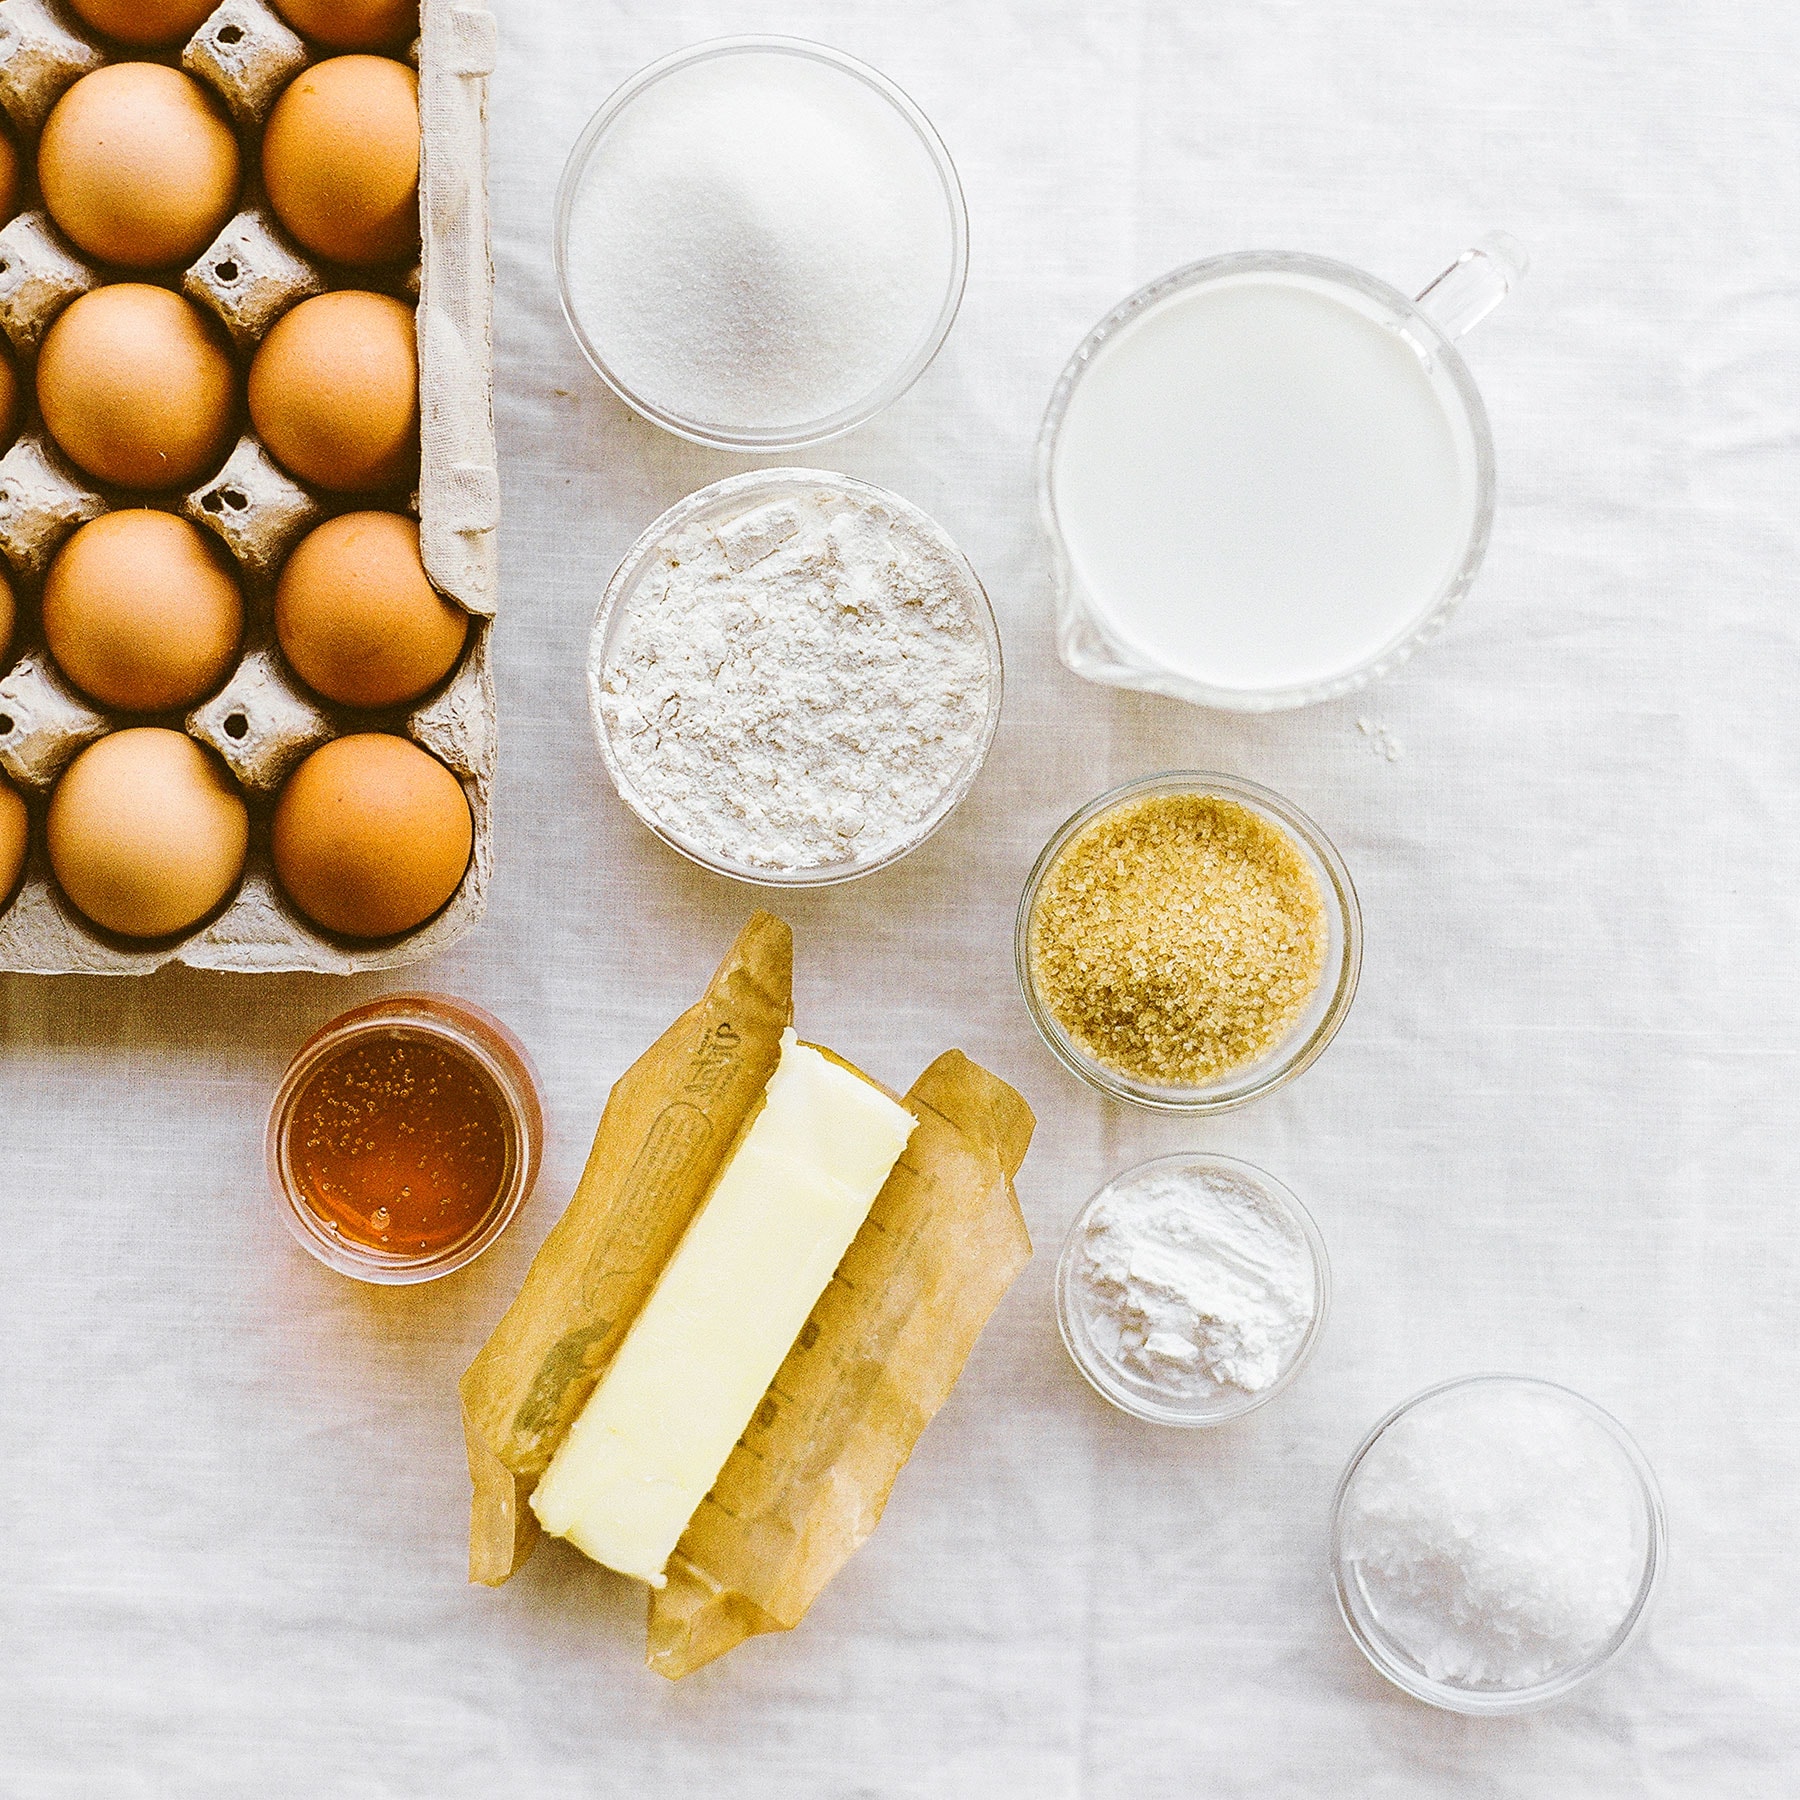 Eggs, butter, flour, sugar, and other baking ingredients on a table